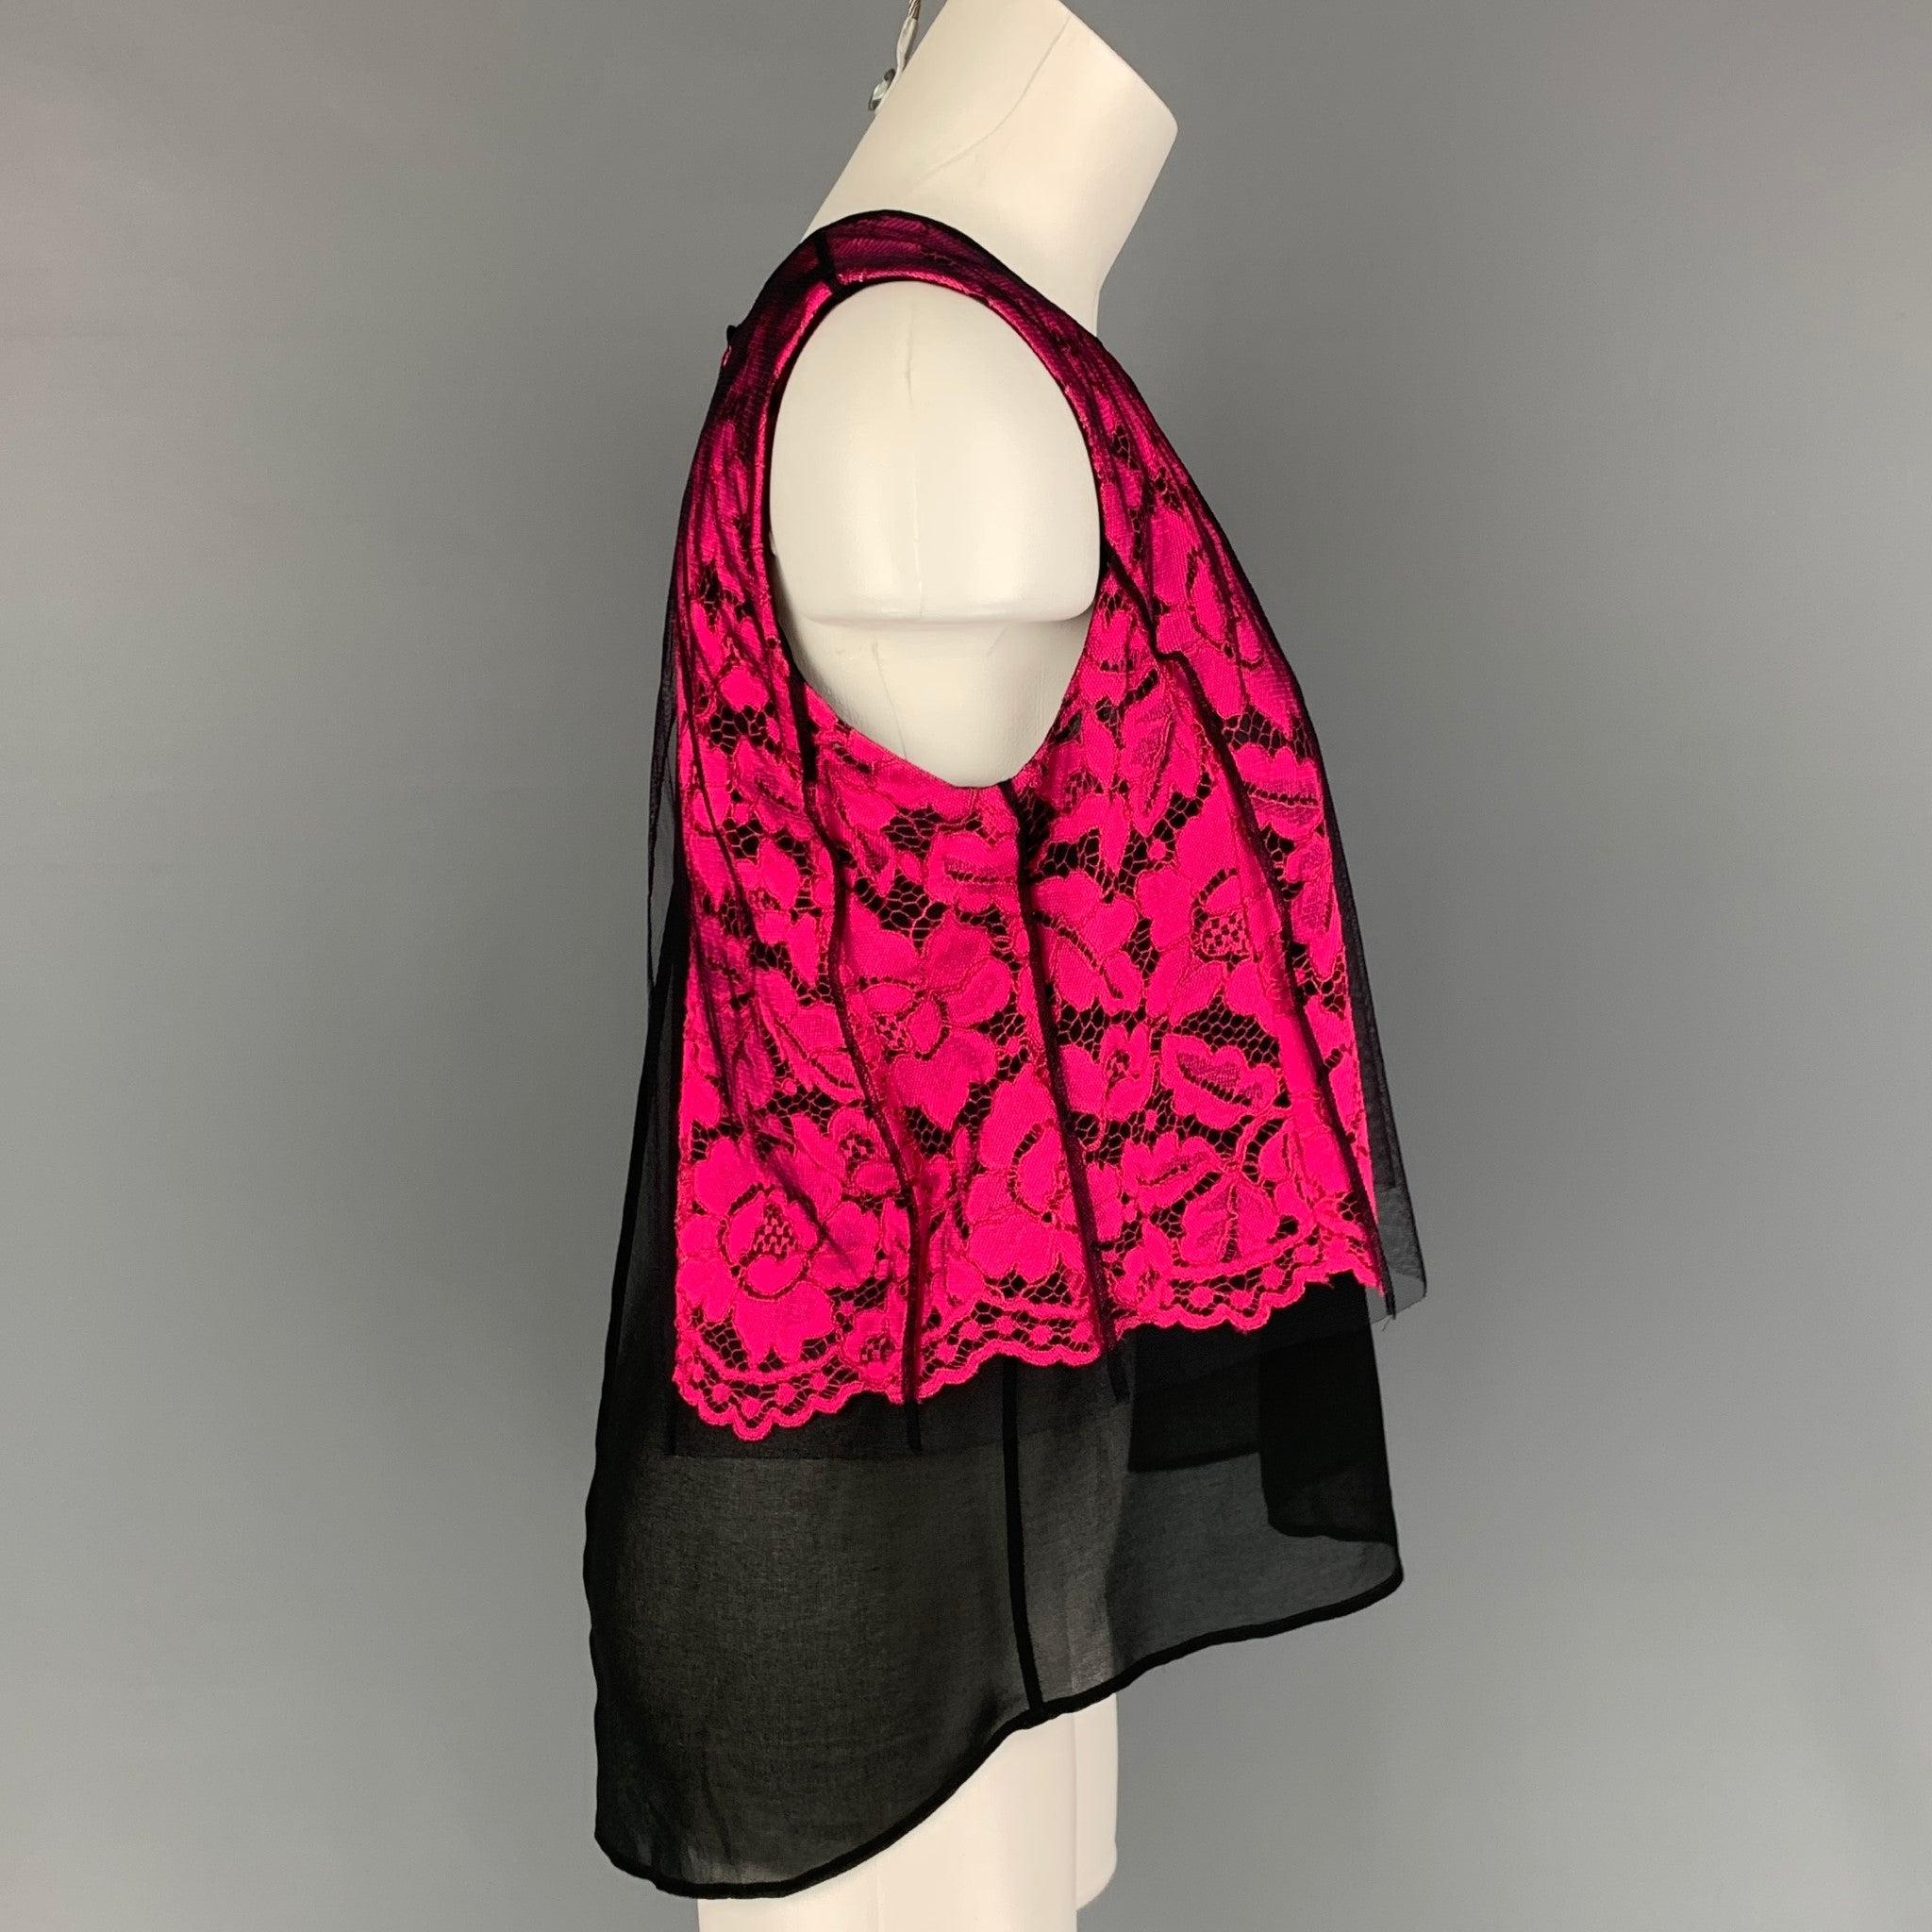 SANDRO dress top comes in a black & pink polyamide featuring a lace panel, sleeveless, and a snap button closure. Made in Bulgaria.
Very Good
Pre-Owned Condition. 

Marked:   2 

Measurements: 
 
Shoulder:
13.5 inches  Bust: 36 inches  Length: 25